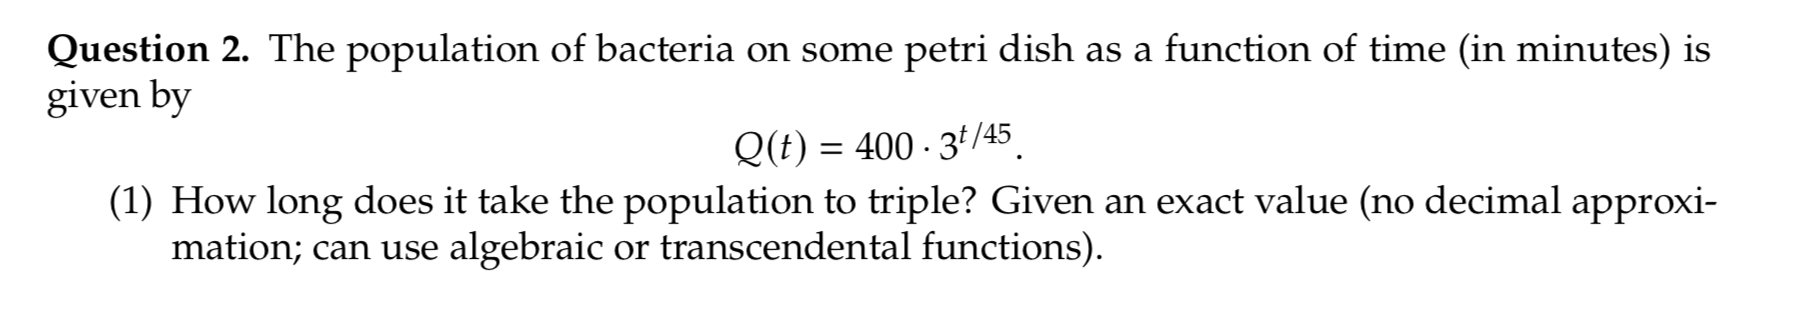 Question 2. The population of bacteria on some petri dish as a function of time (in minutes) is
given by
Q(t) = 400 - 3ª/45
(1) How long does it take the population to triple? Given an exact value (no decimal approxi-
mation; can use algebraic or transcendental functions).
